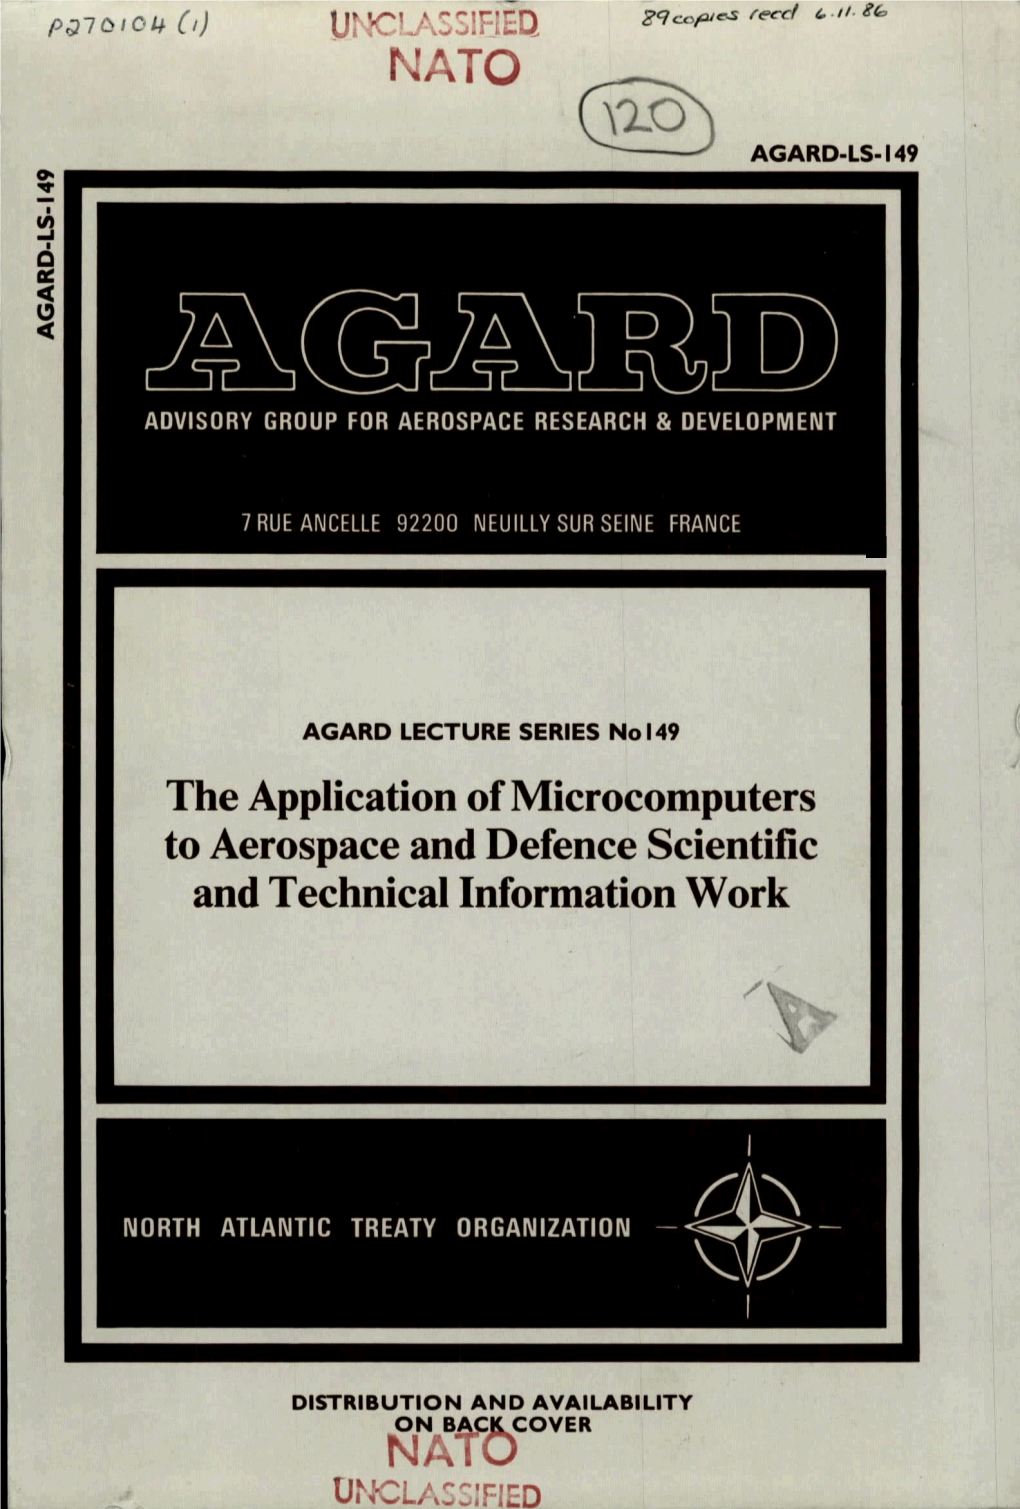 The Application of Microcomputers to Aerospace and Defence Scientific and Technical Information Work